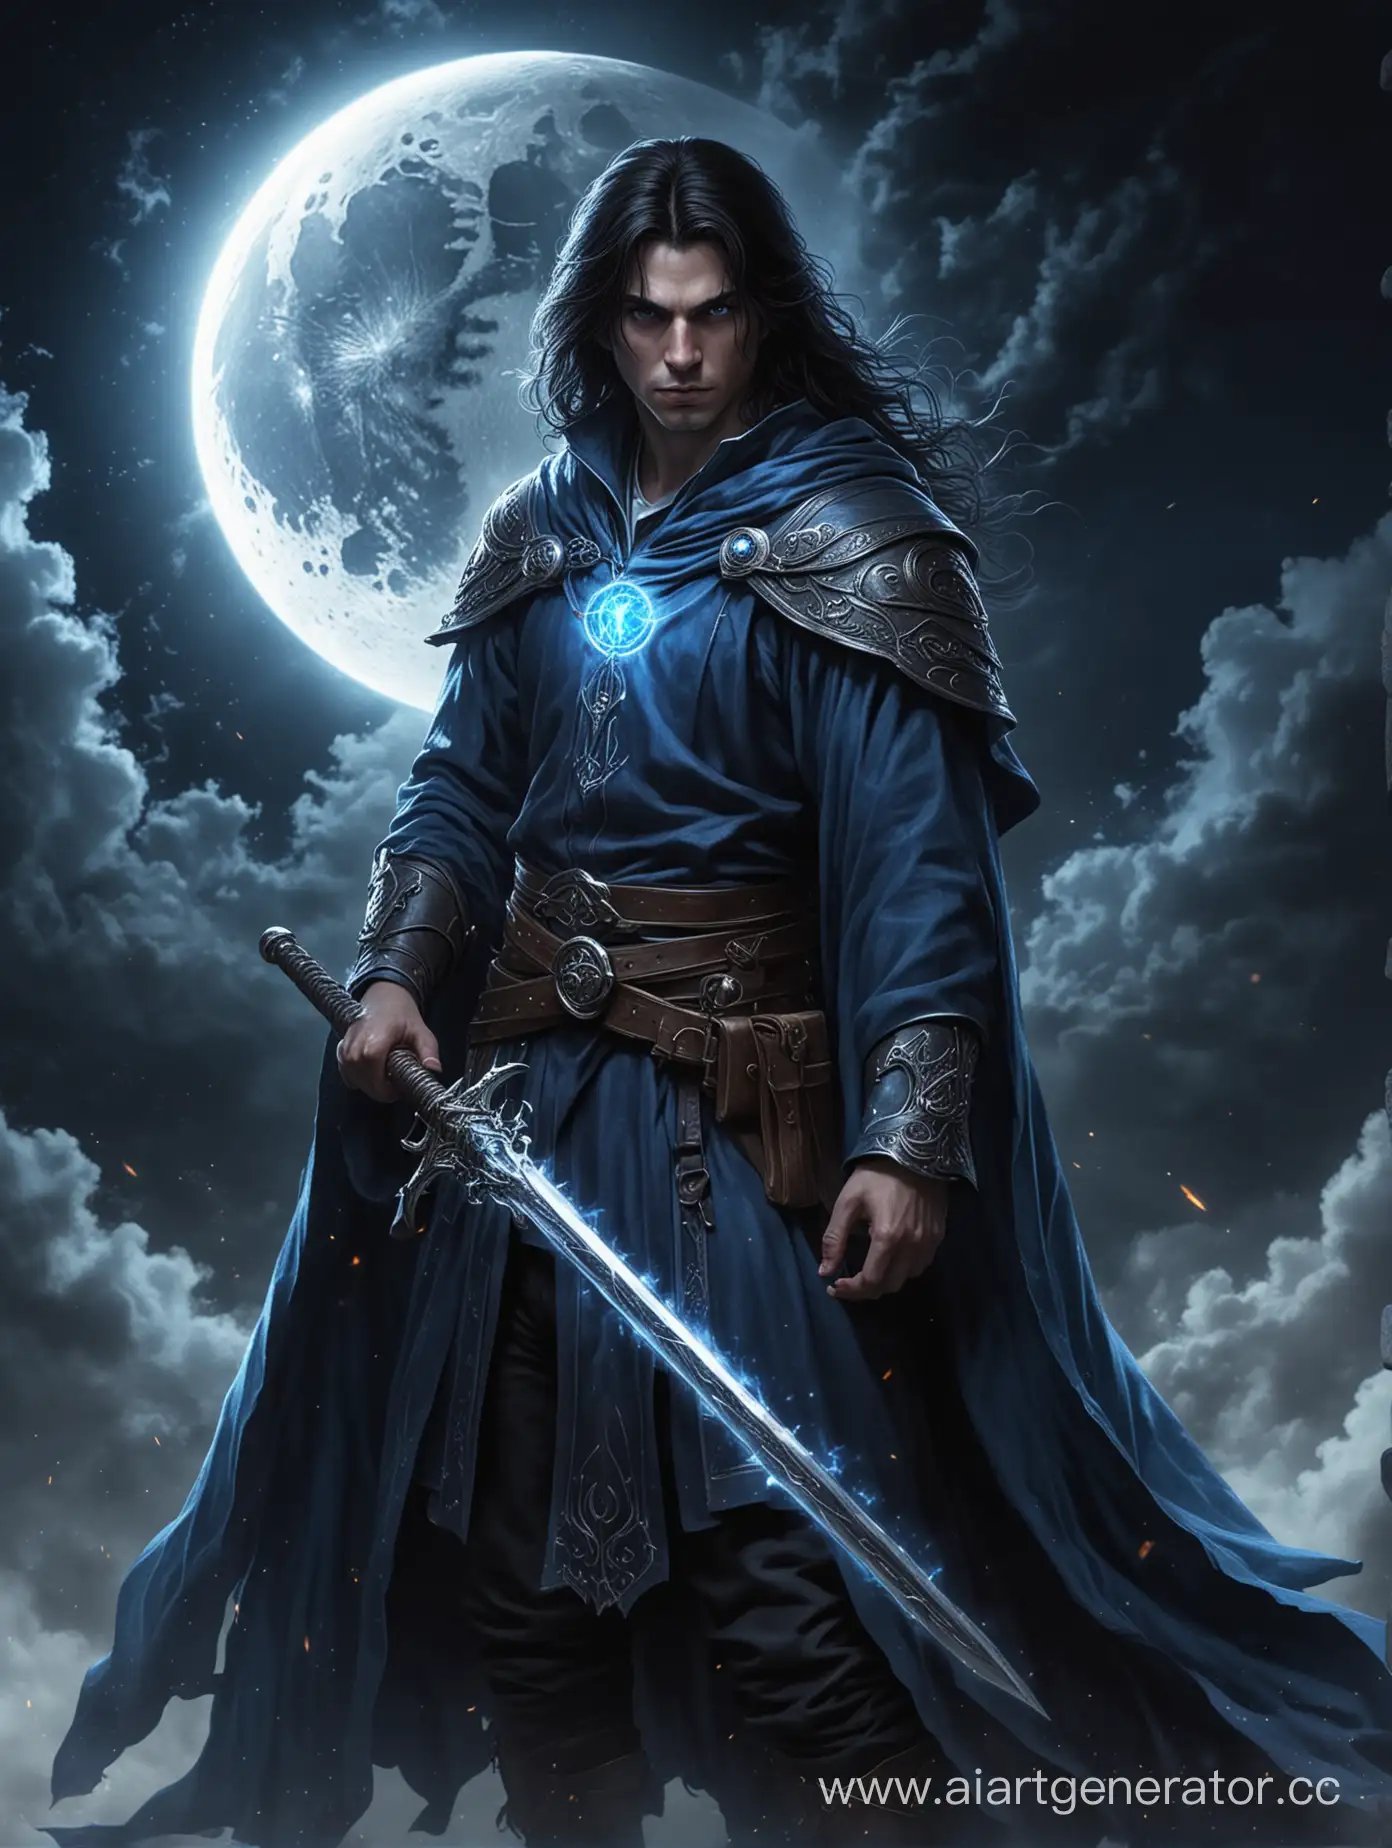 Young-Wizard-Holding-Sword-Against-Moonlit-Backdrop